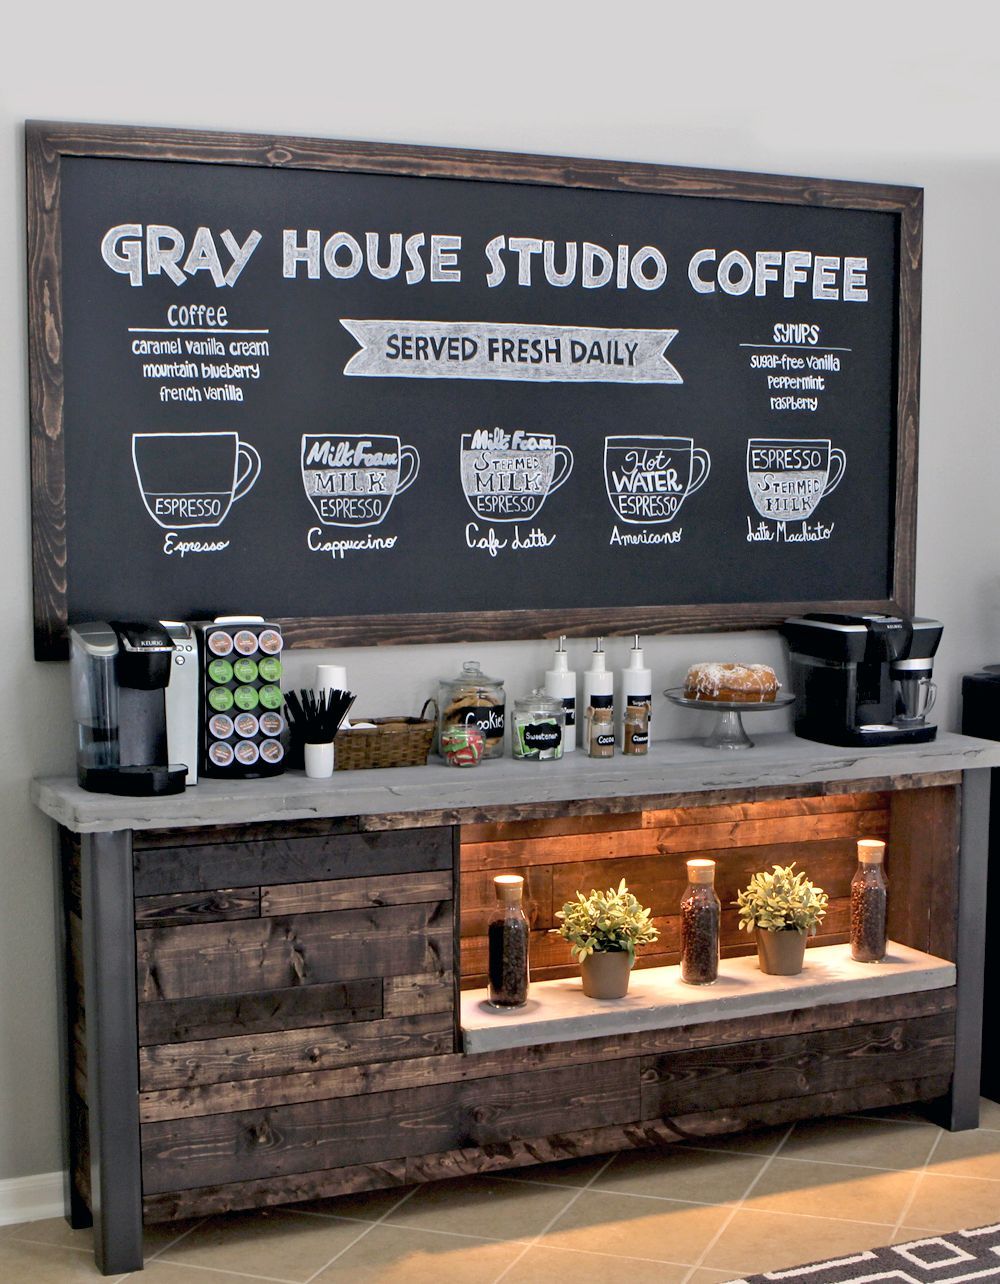 We wanted to bring a coffee shop atmosphere to our breakfast nook so we built our own coffee bar.